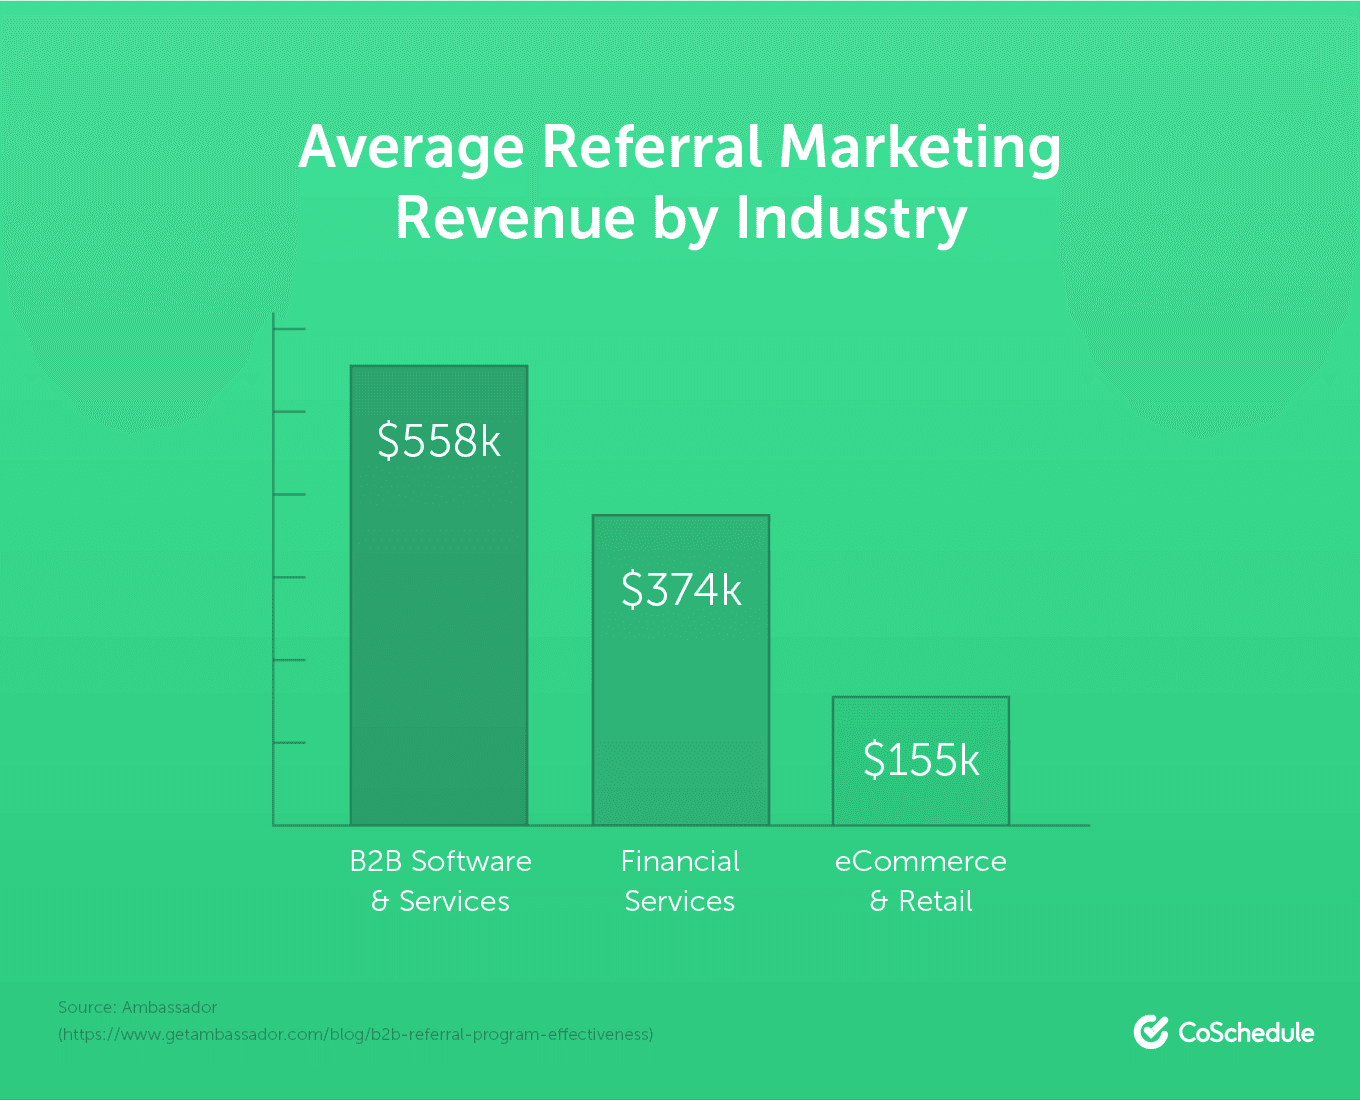 Statistic on referral marketing